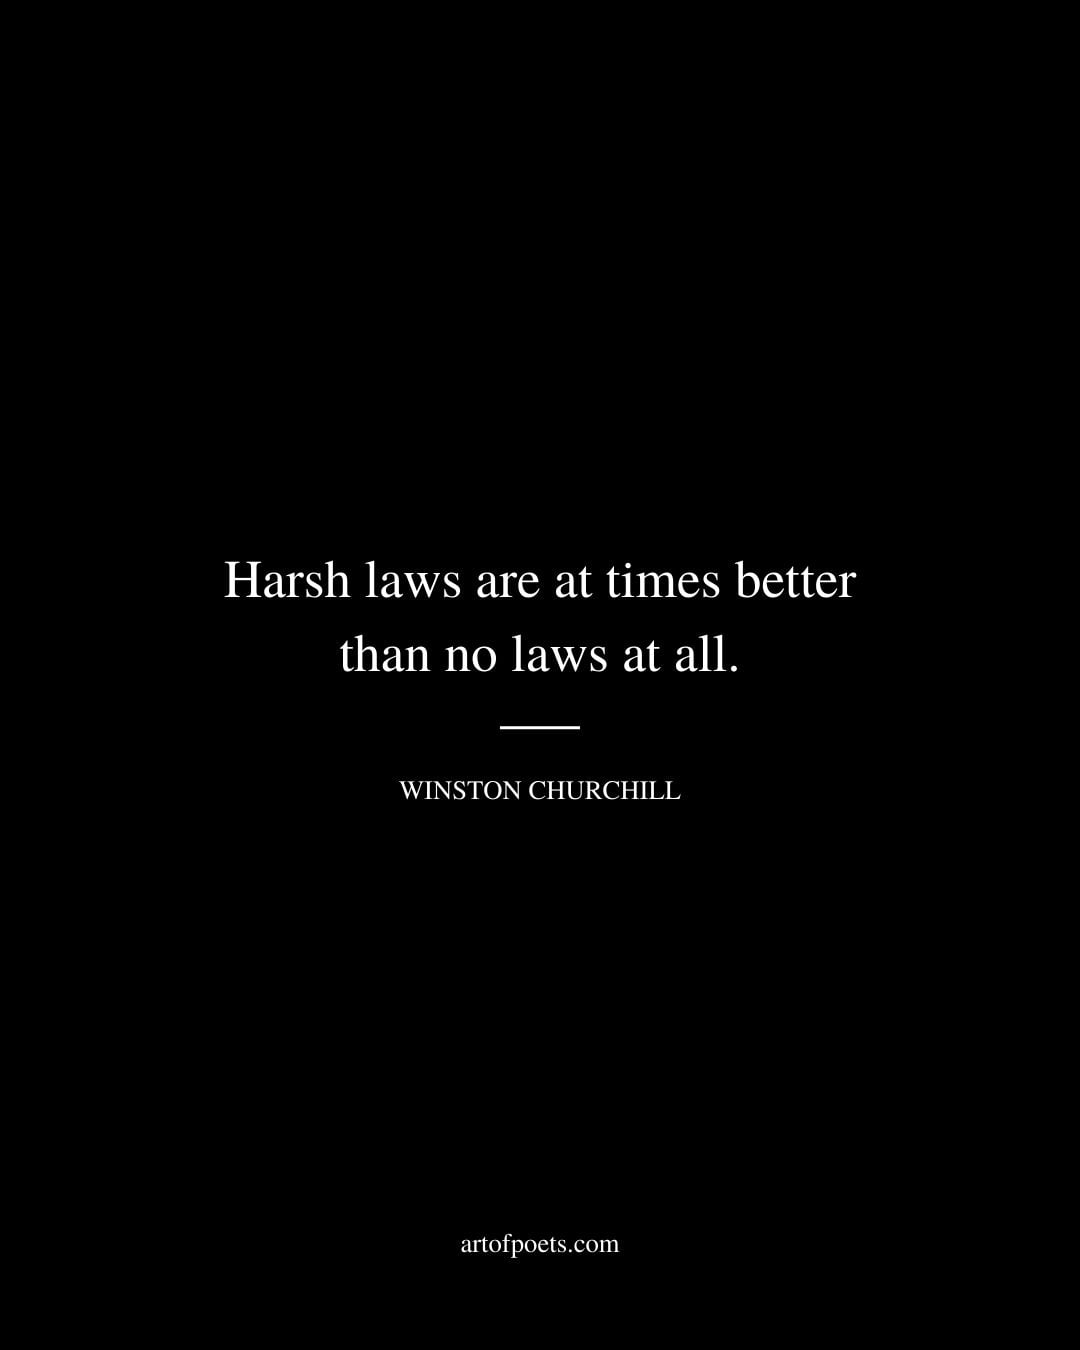 Harsh laws are at times better than no laws at all